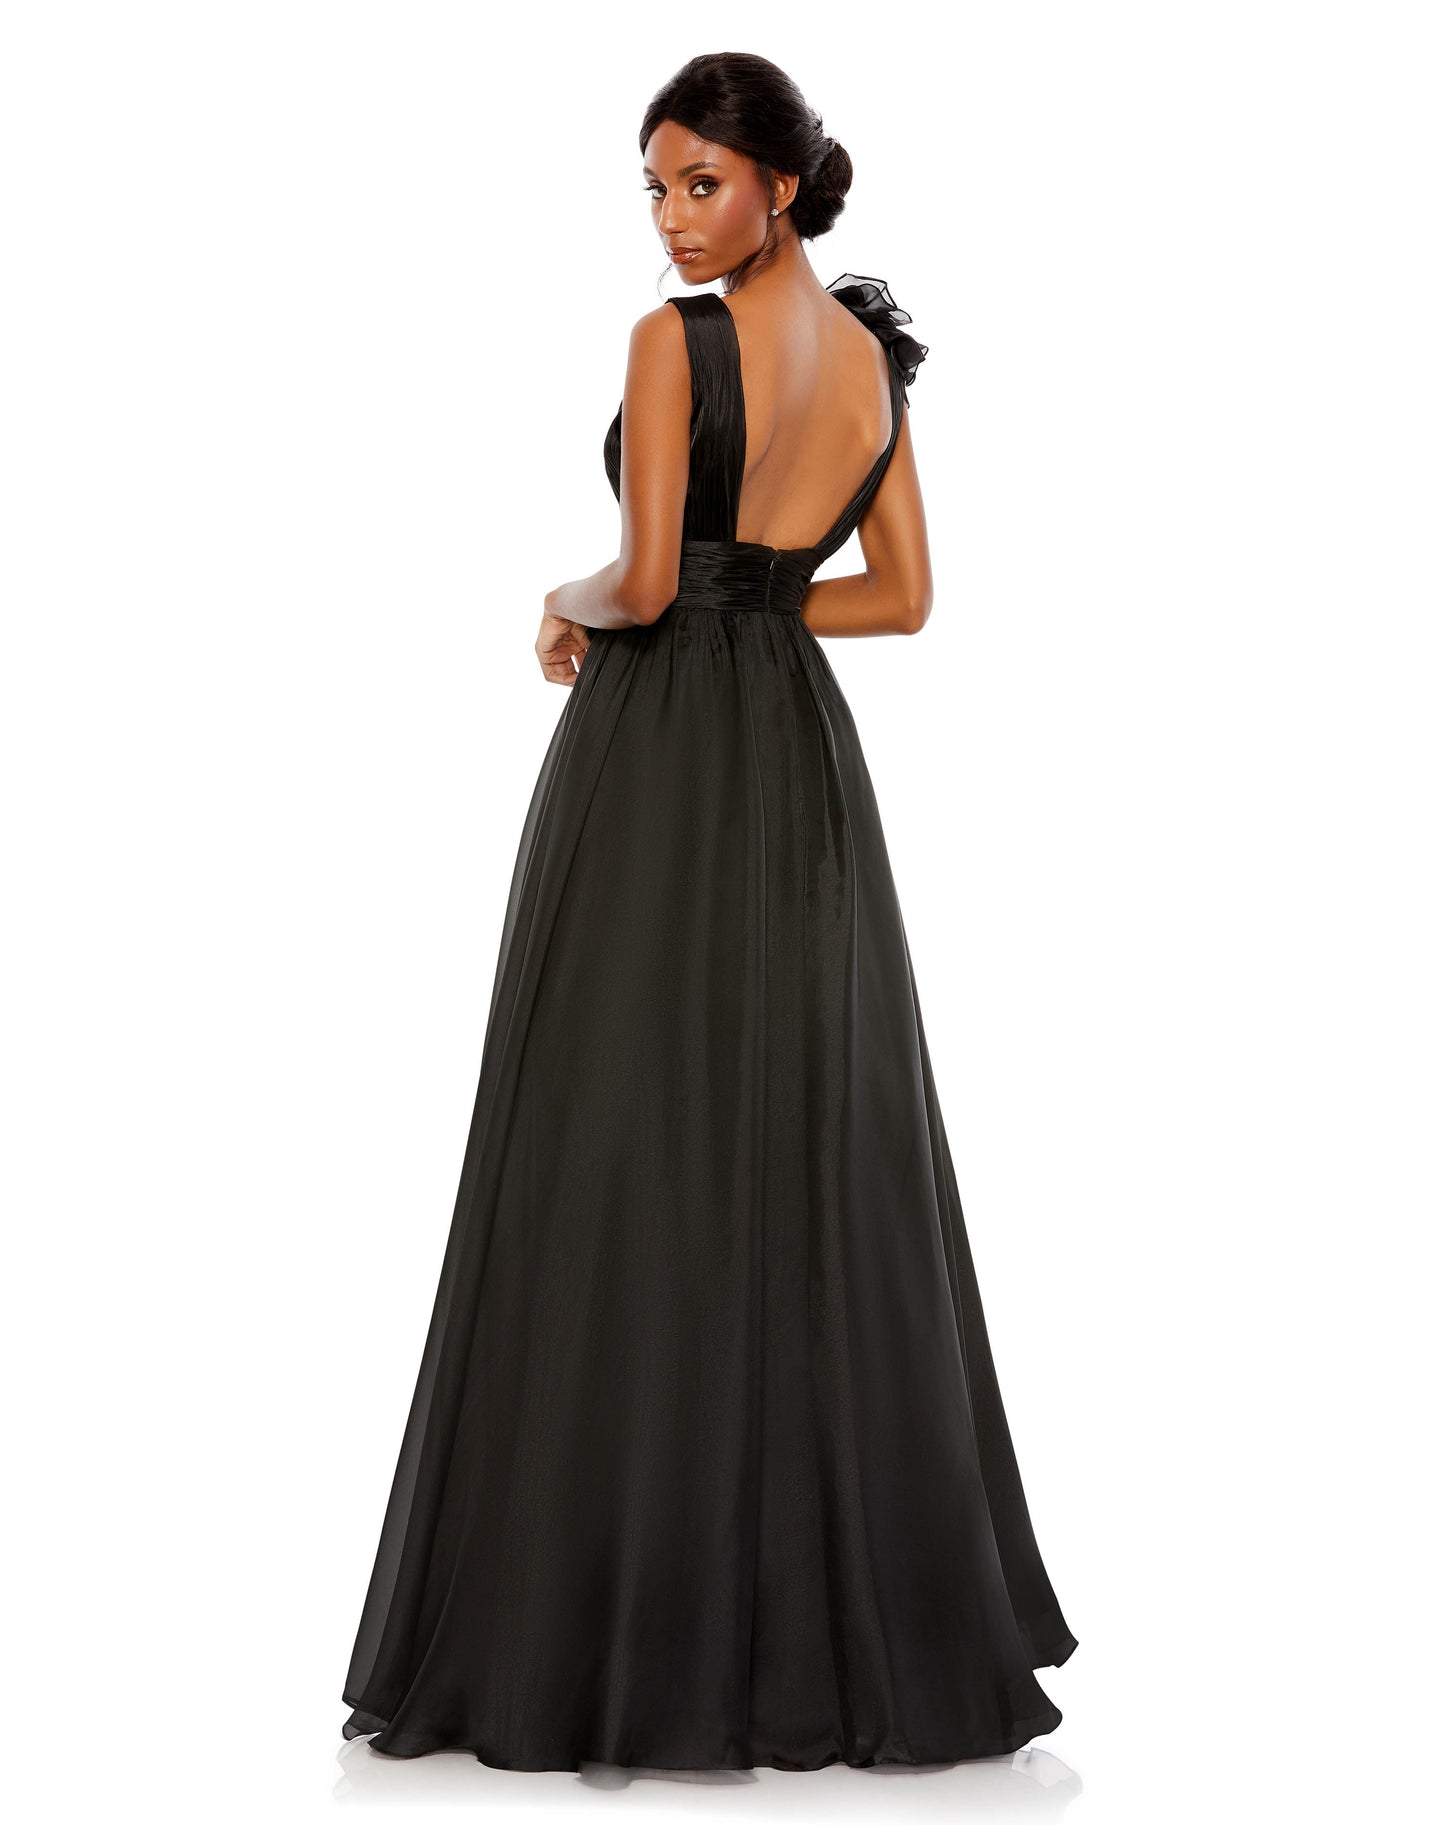 Ruffle Detailed Evening Gown